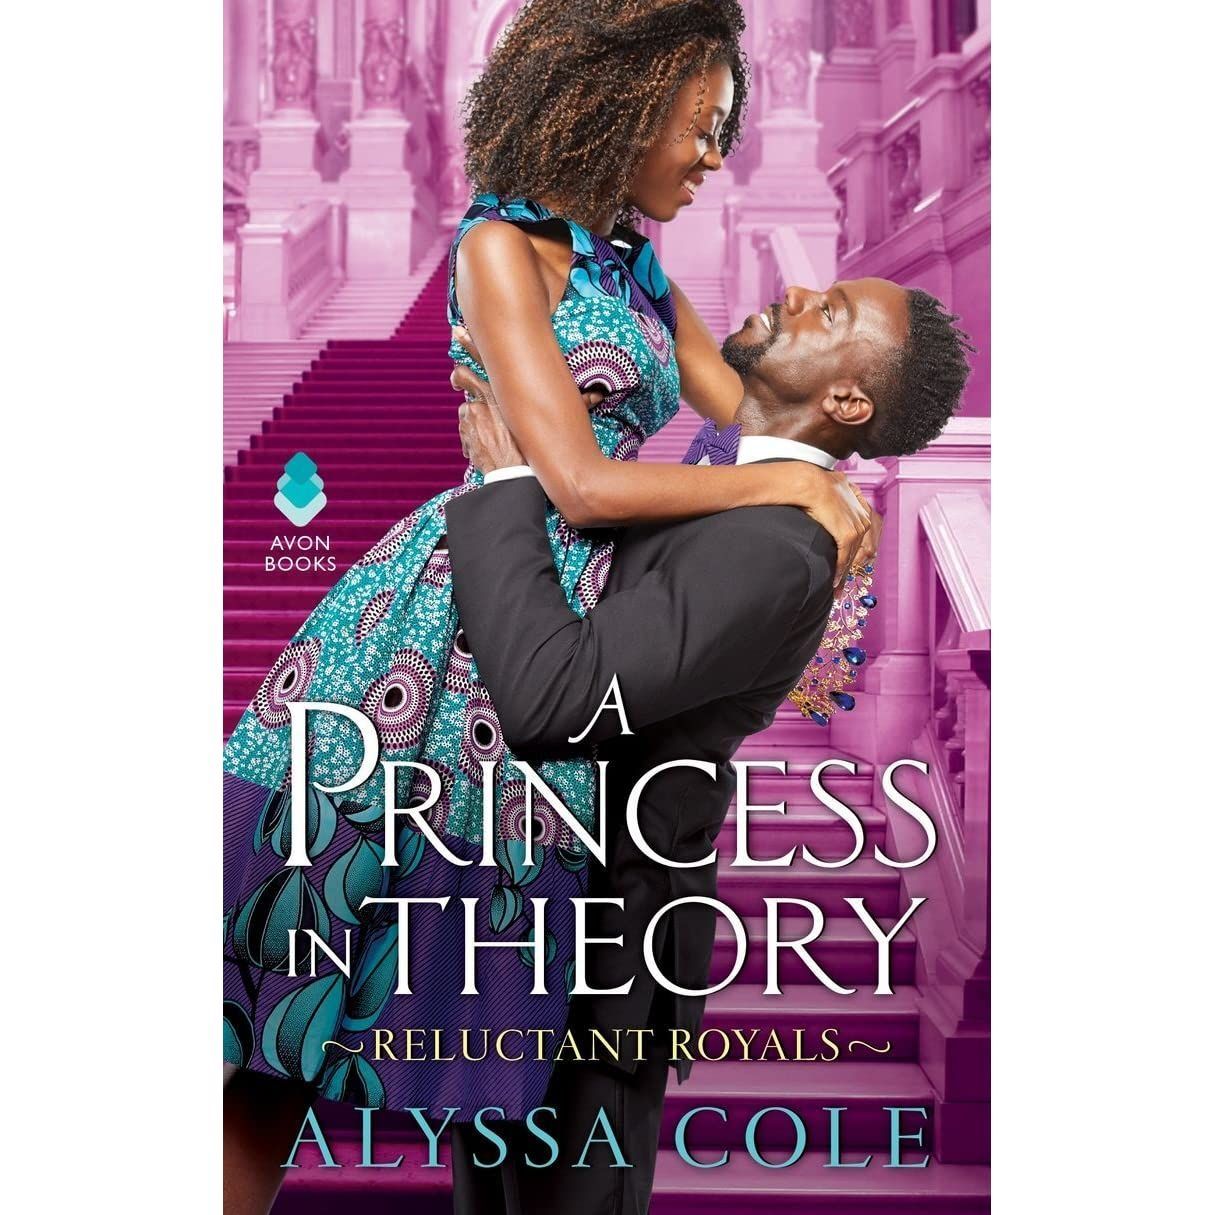 A Princess in Theory: Reluctant Royals